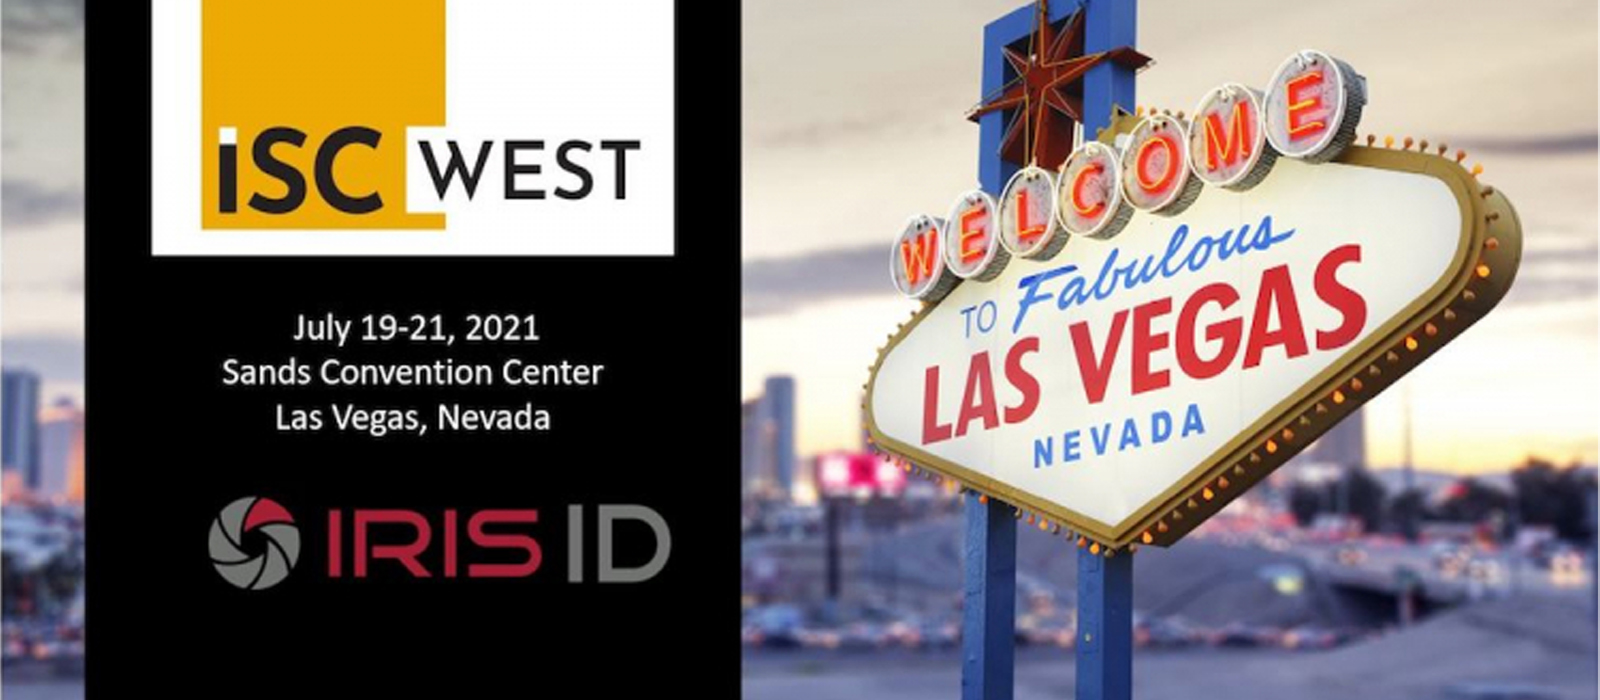 International Security Conference ISC West 2021